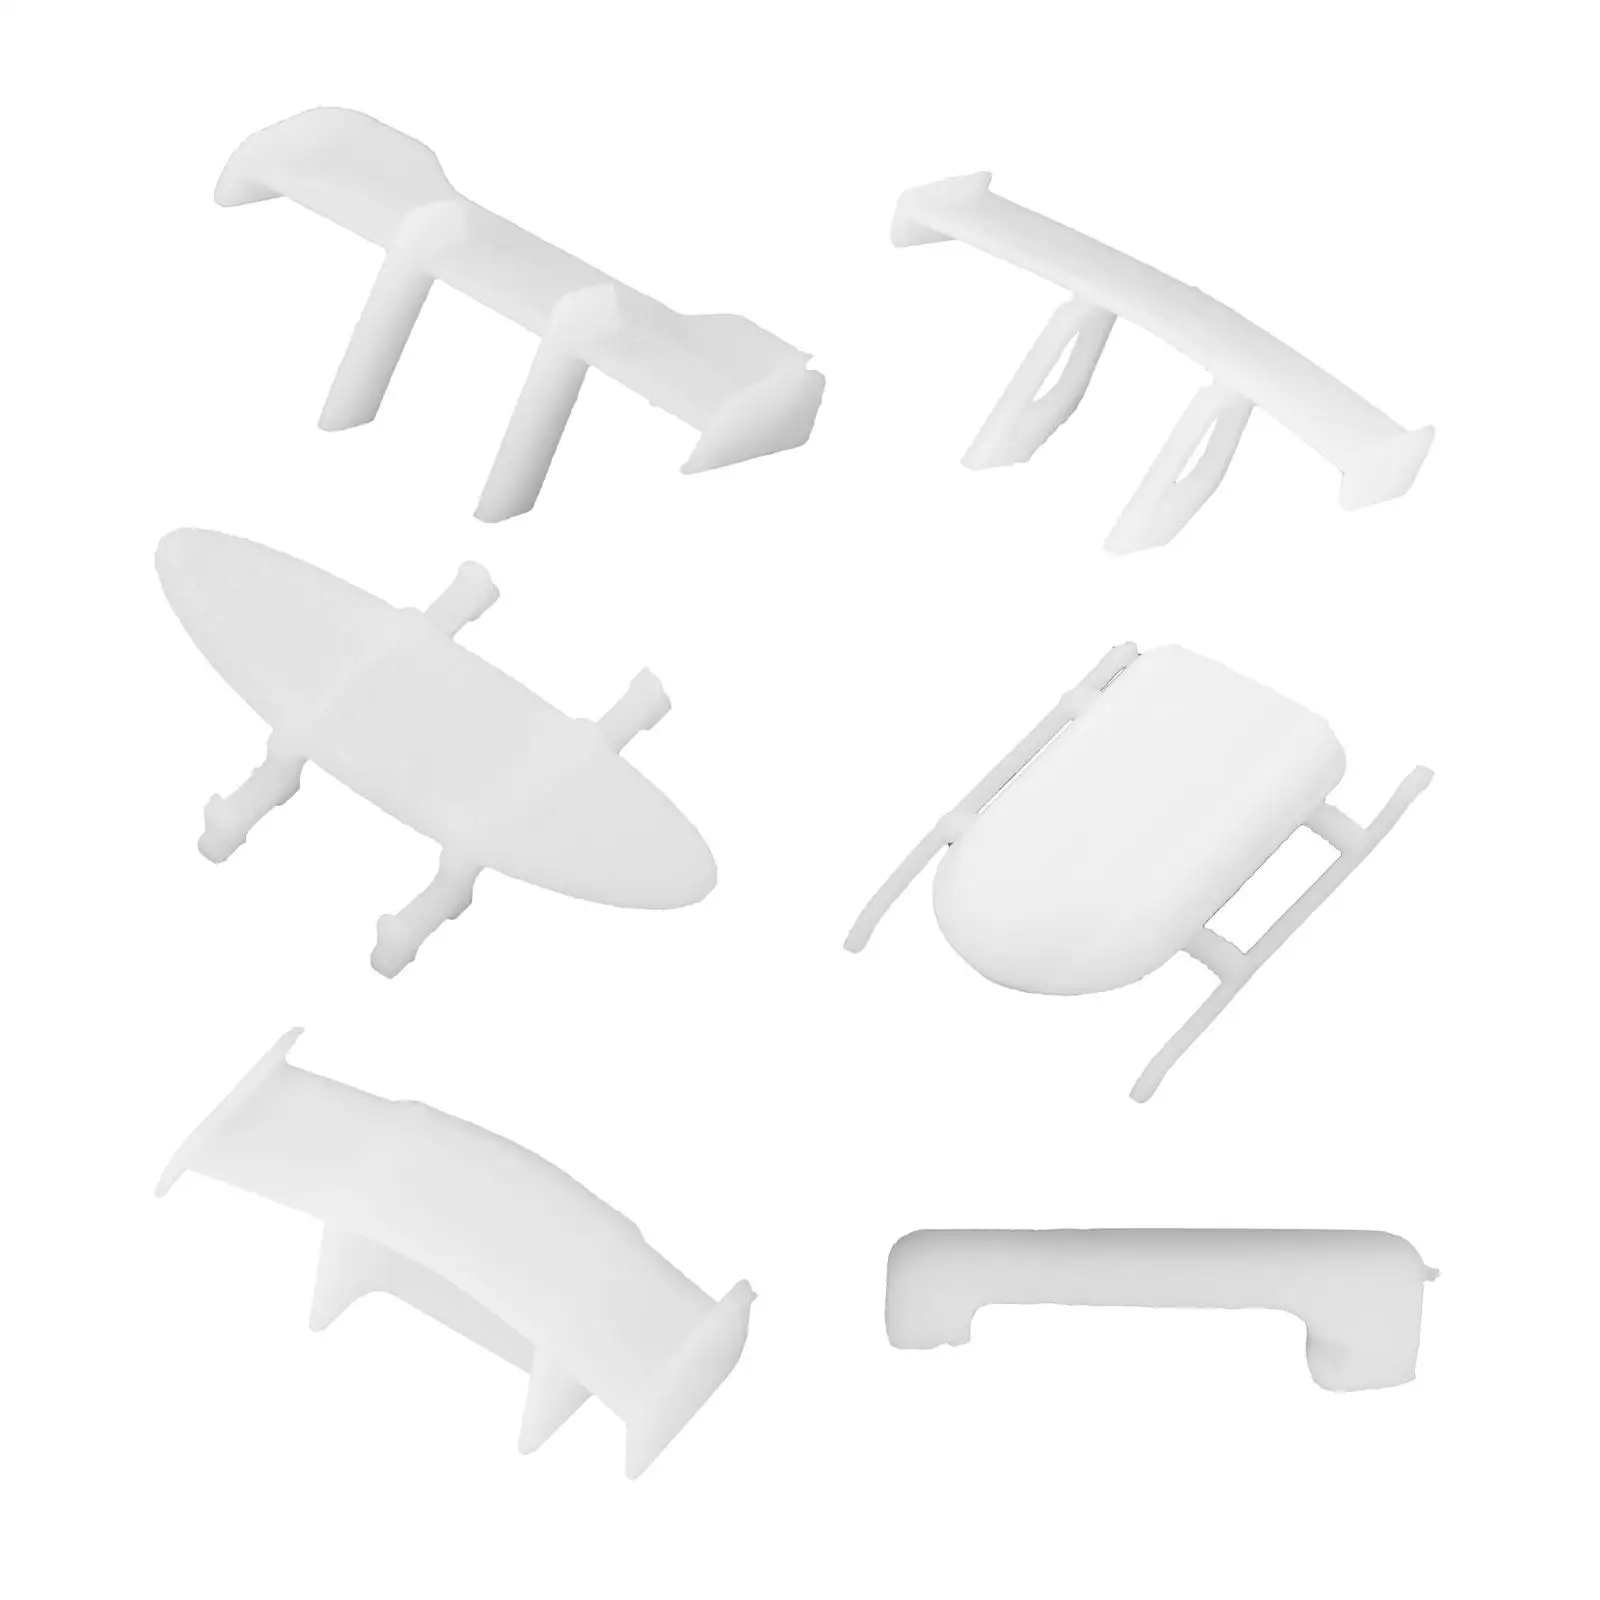 Plastic 1:64 Scale Alloy Model Car Spoiler Tail Wing Luggage Rack Parts DIY Upgrades Accessory luftwaffe 109e militarized combat fighter aircraft plastic model 1 72 scale toy gift collection simulation display